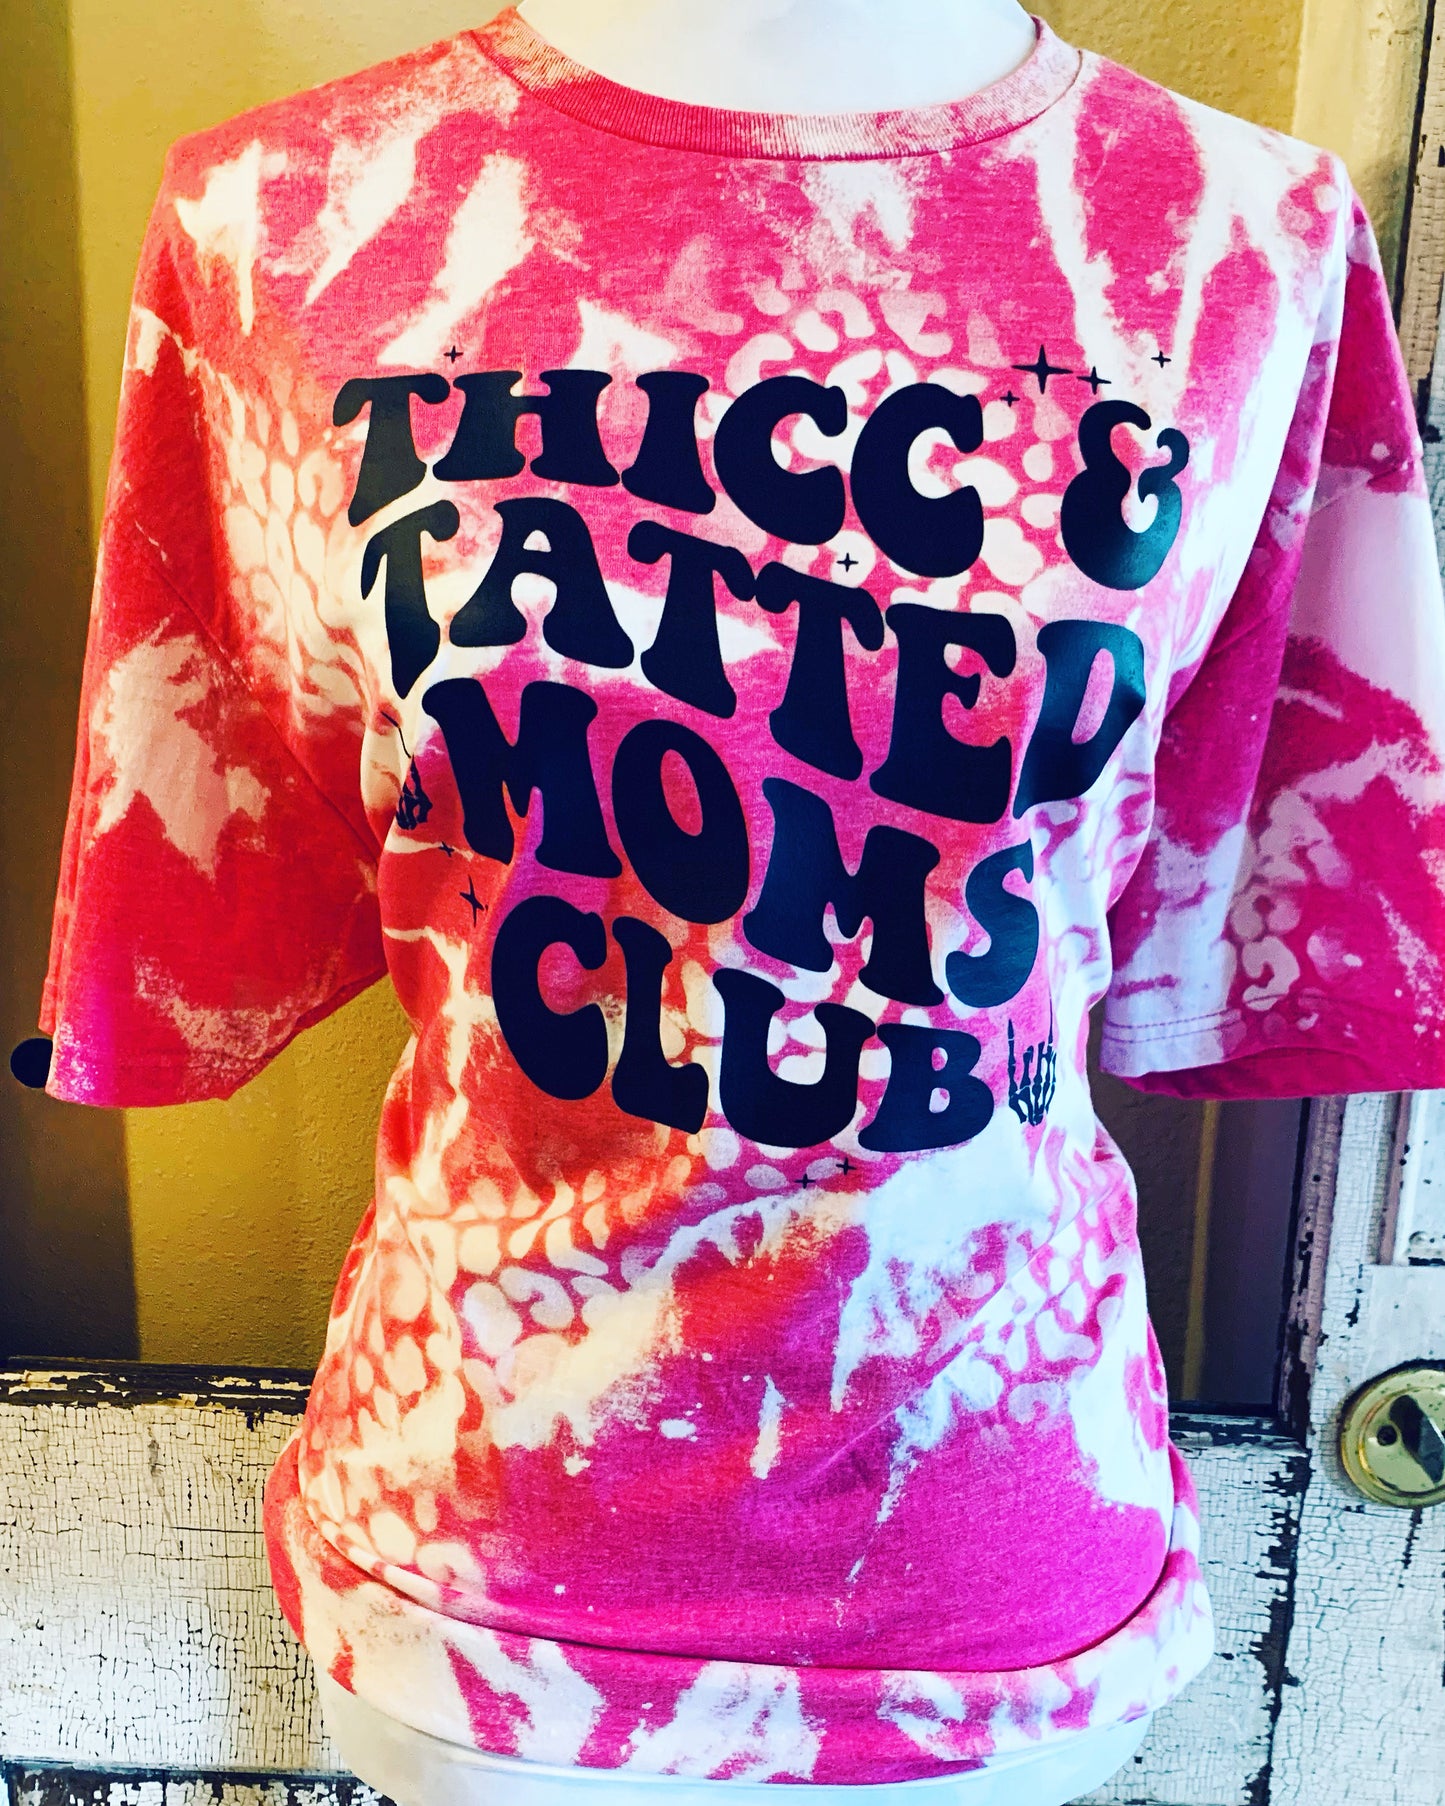 THICC & Tatted Moms Club